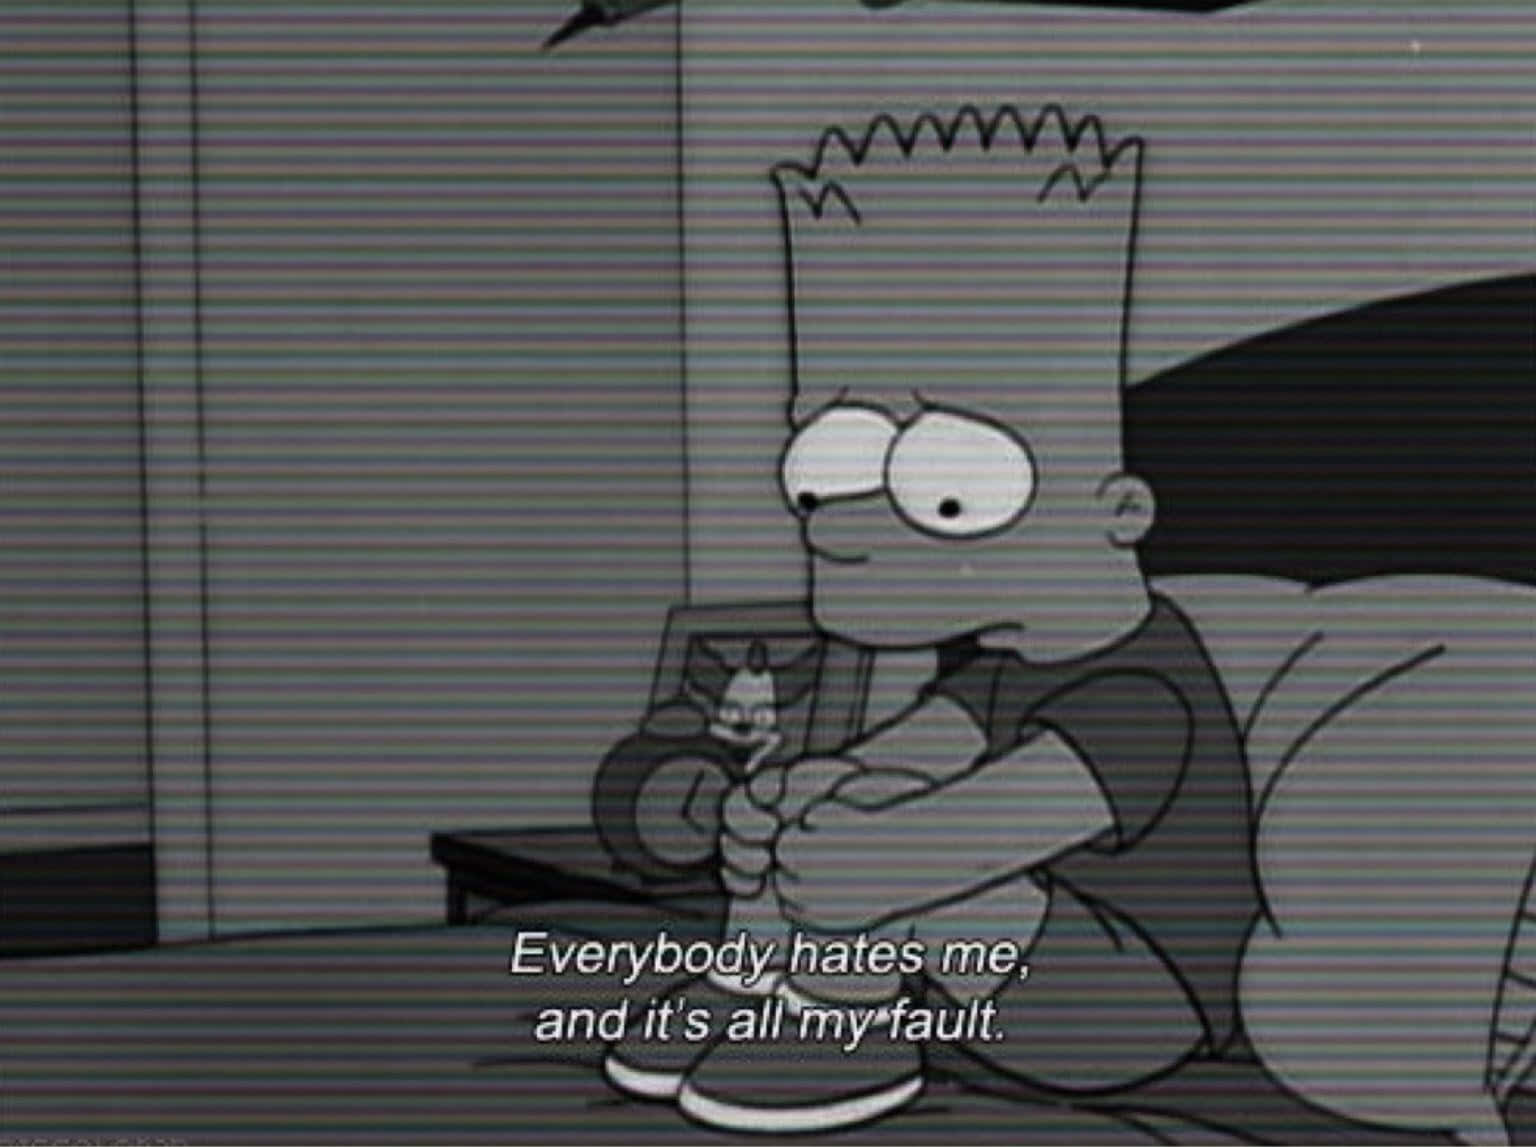 The Simpsons Quotes - Tumblr Wallpaper